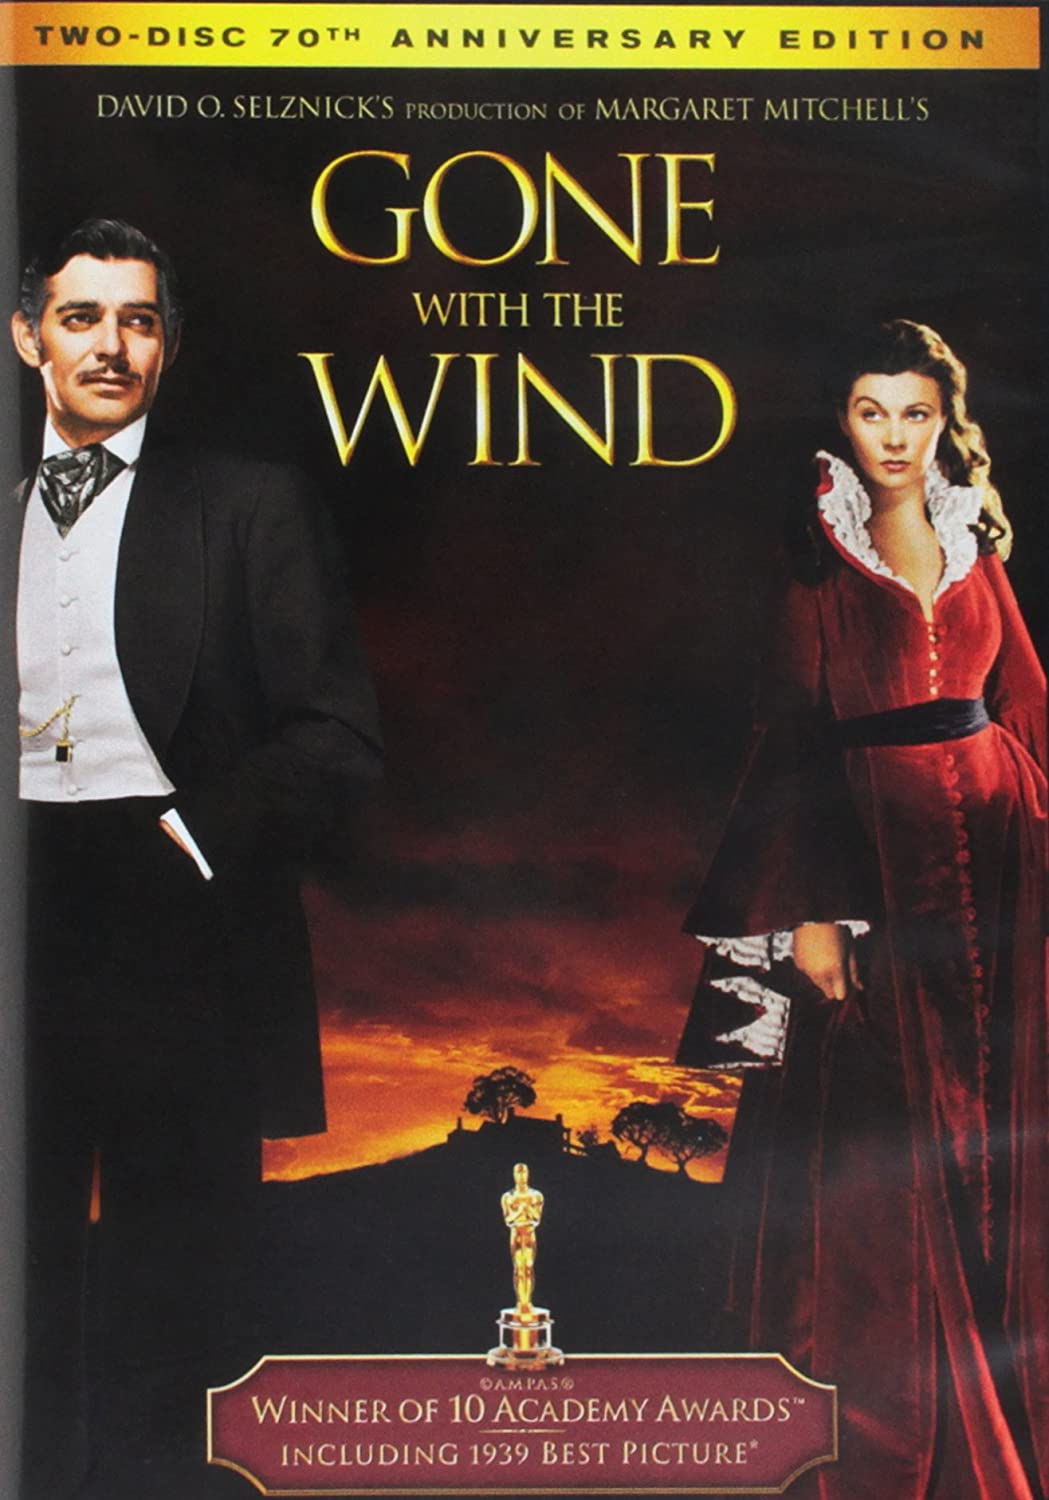 Gone With The Wind (Special Edition) - DVD [ 1939 ]  - Drama Movies On DVD - Movies On GRUV